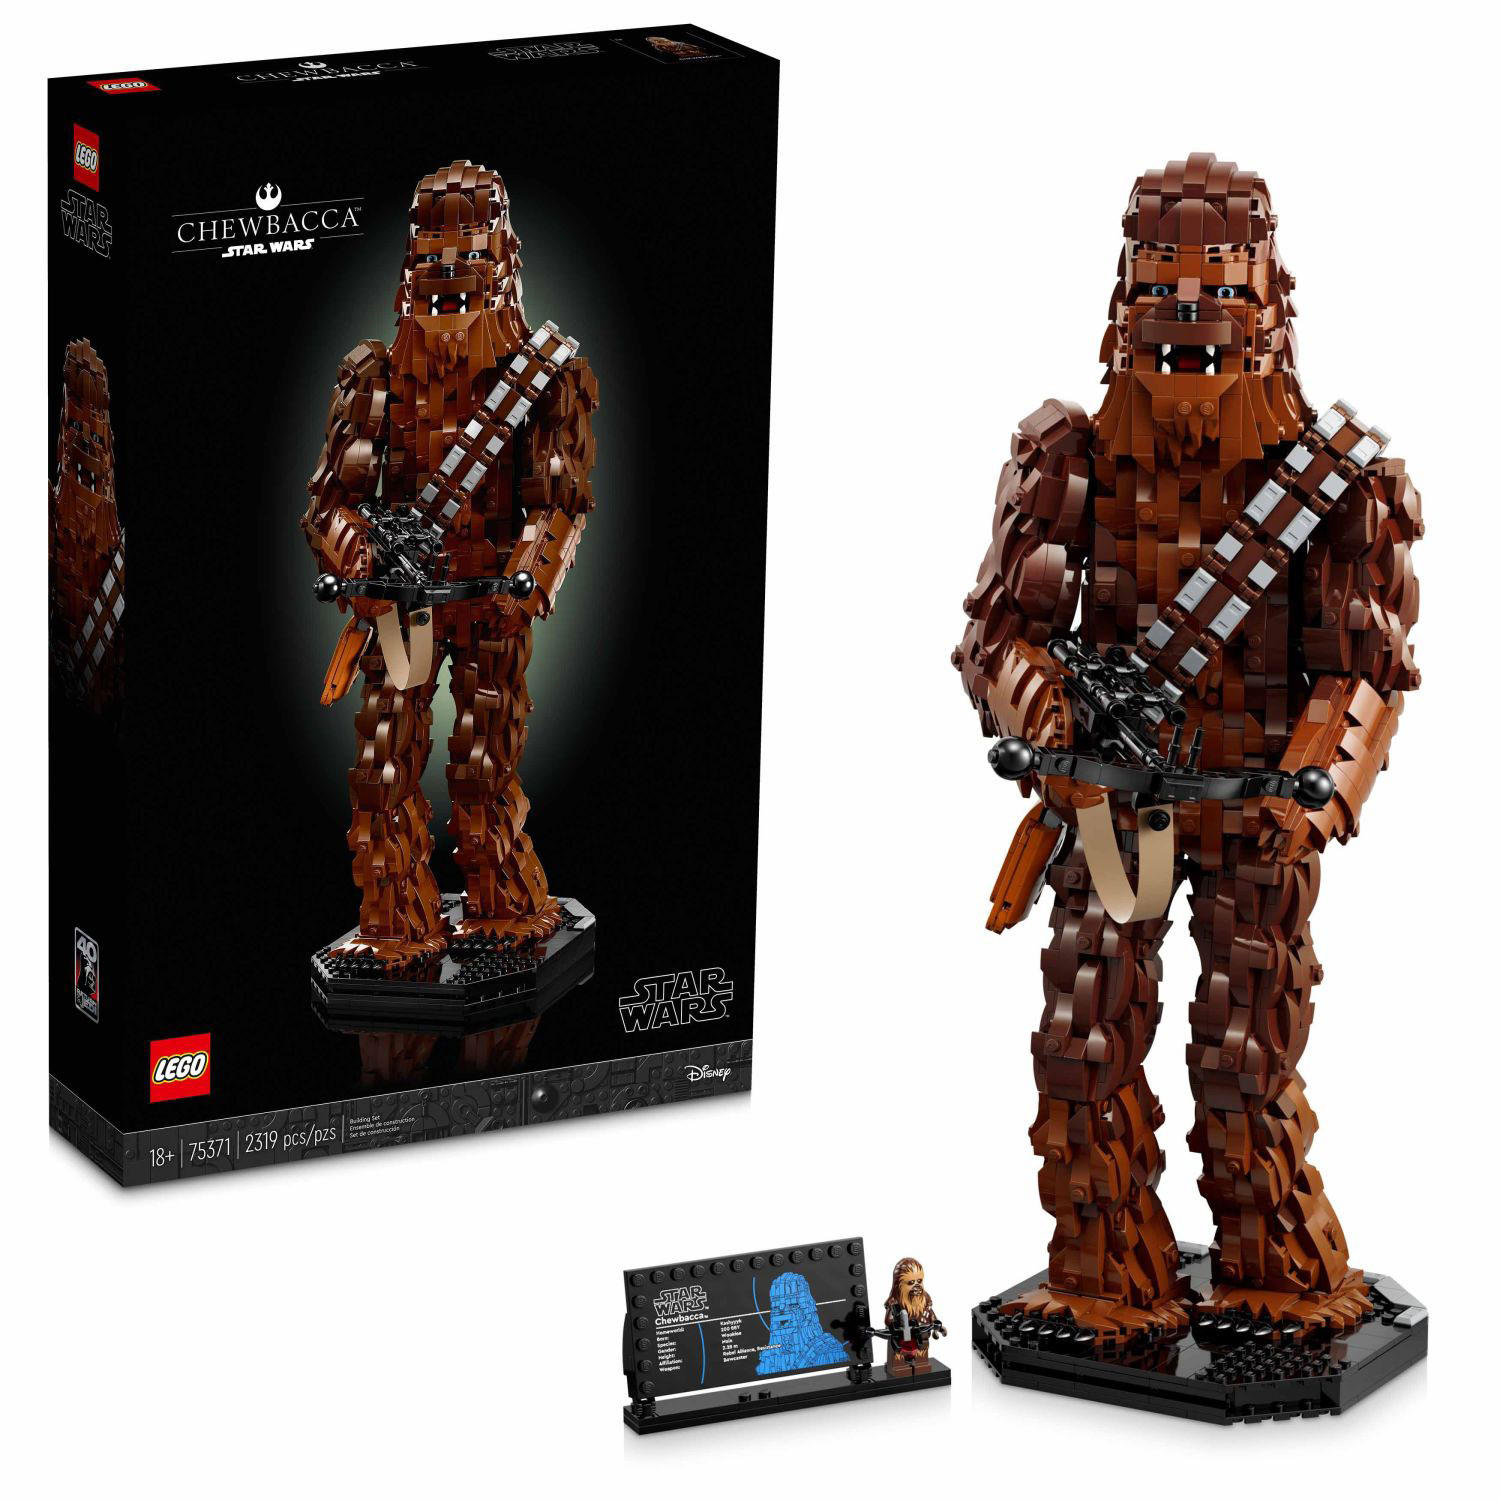 LEGO Star Wars Chewbacca Building Set; Gift Idea for Adults 75371 (2,319 Pieces)